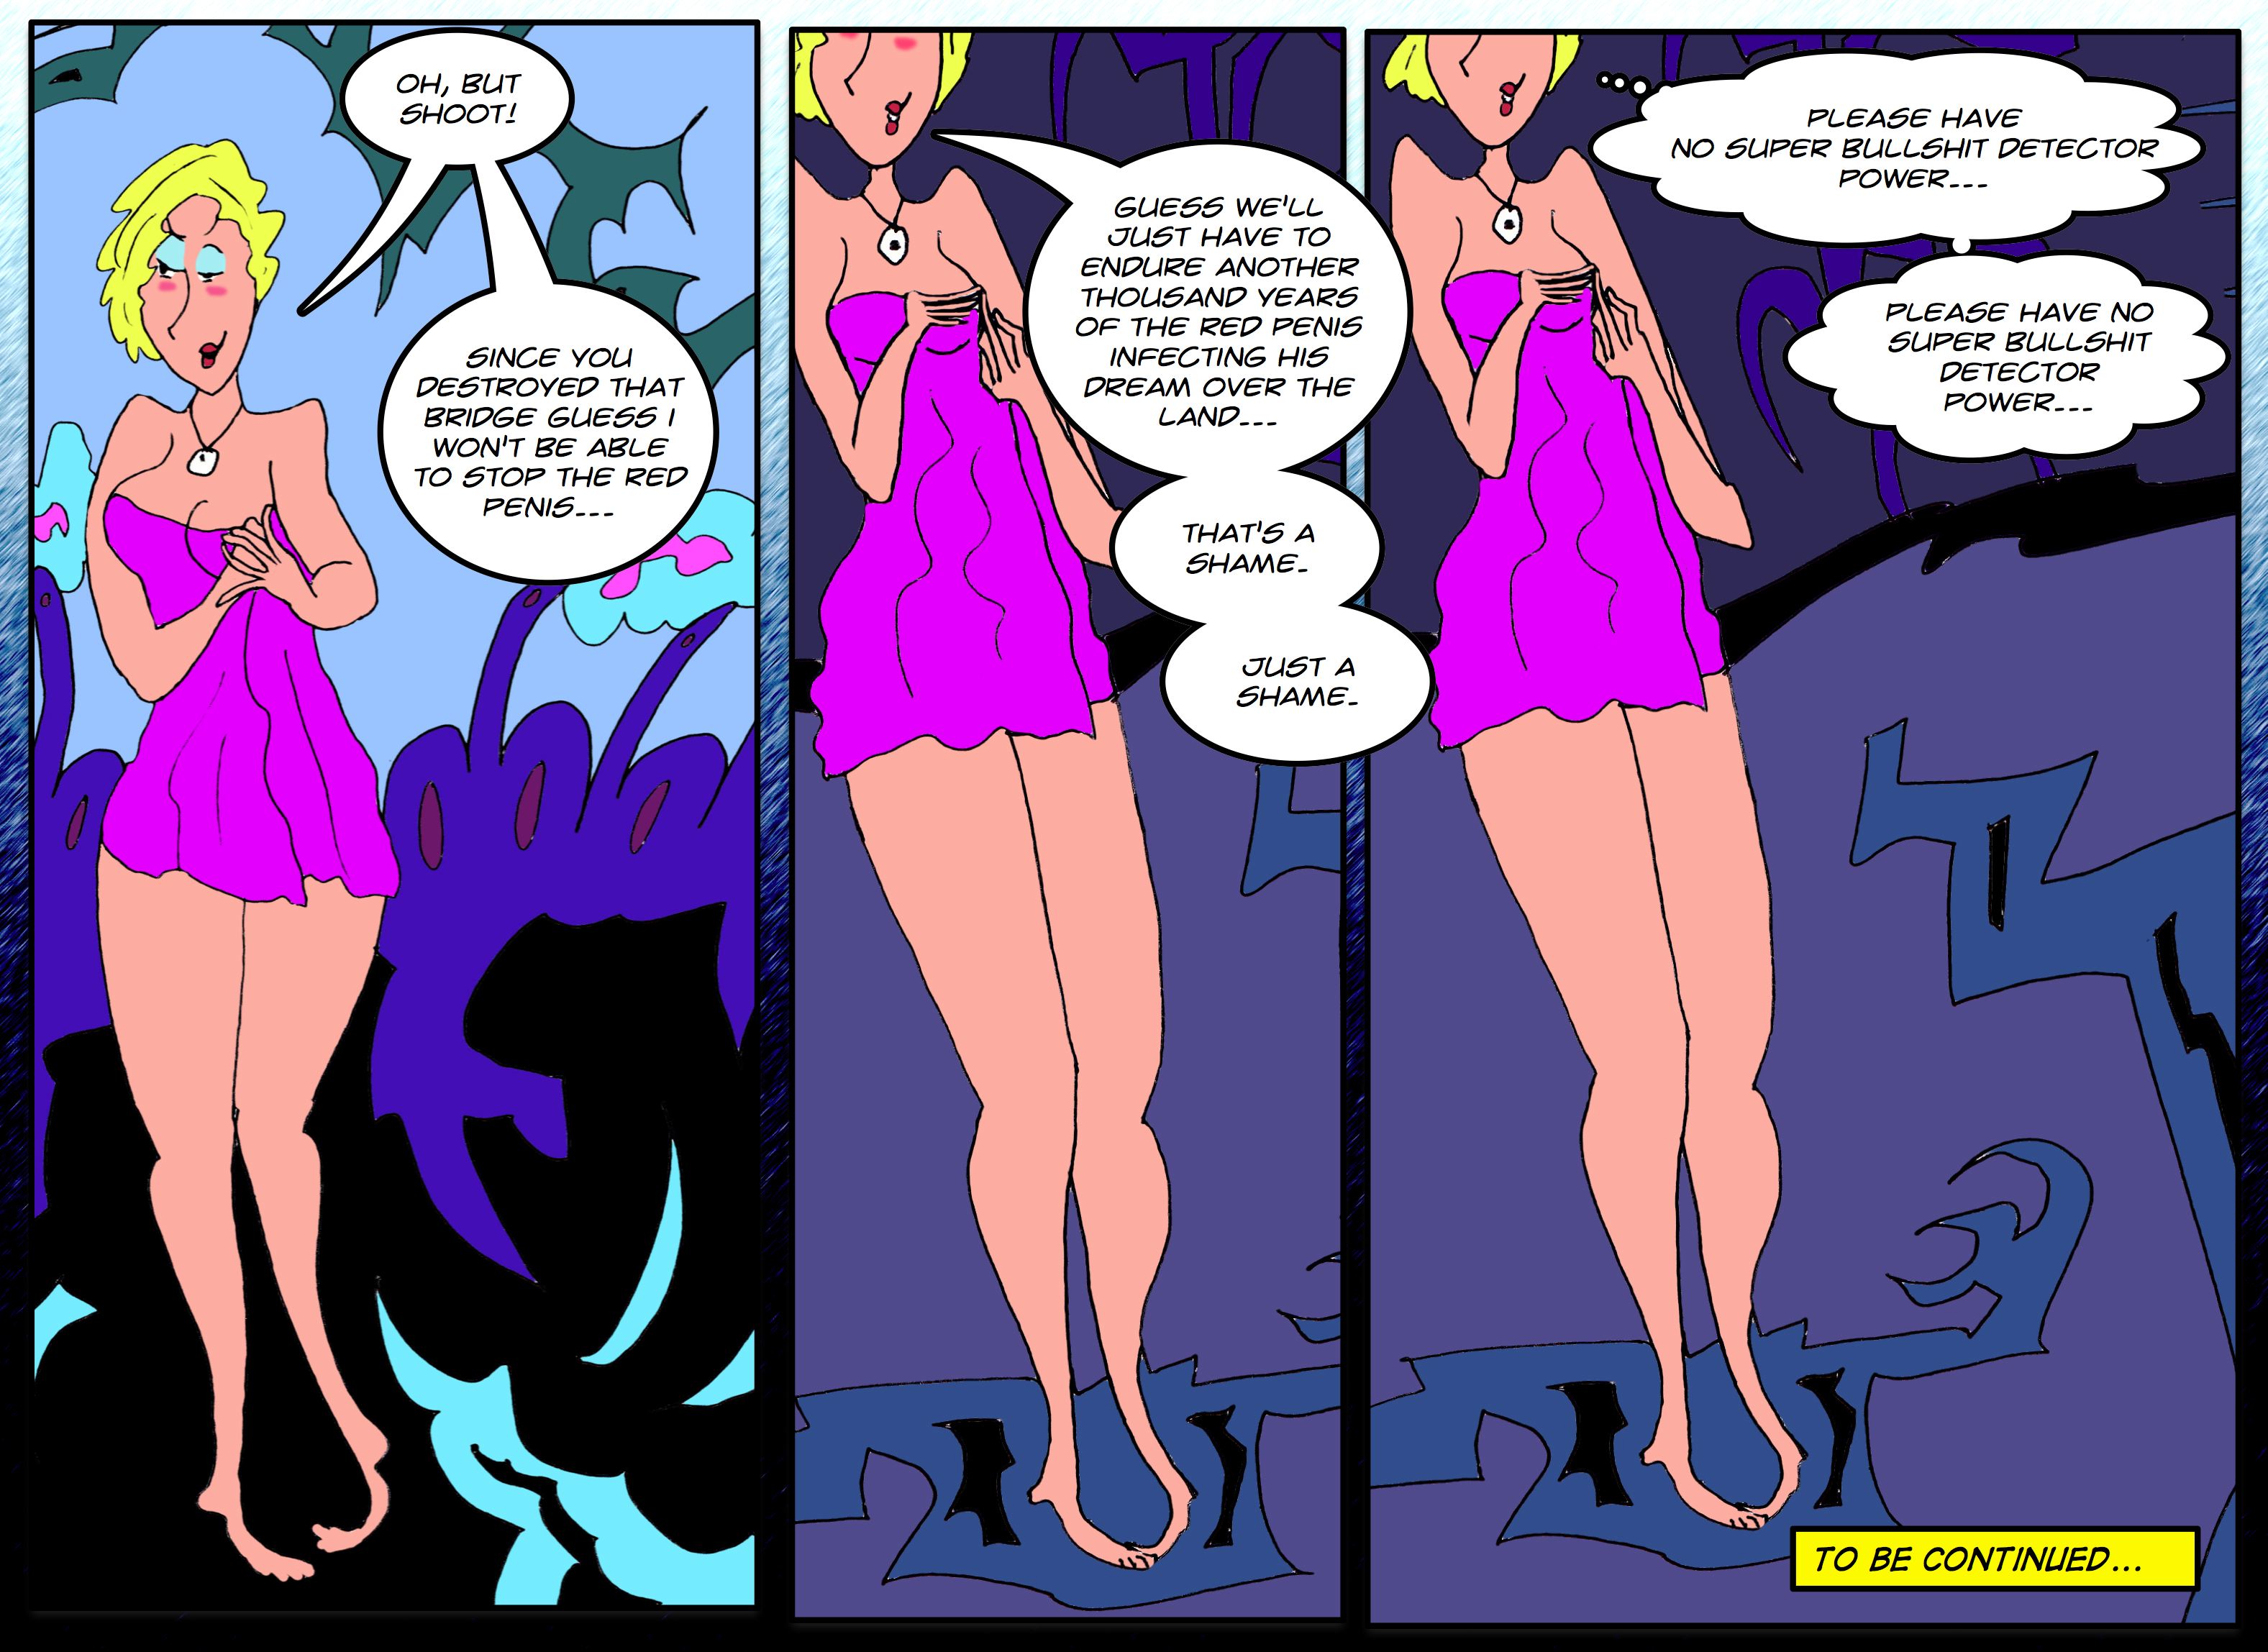 Man, two straight strips without any nudity.  *Shakes hover text head*